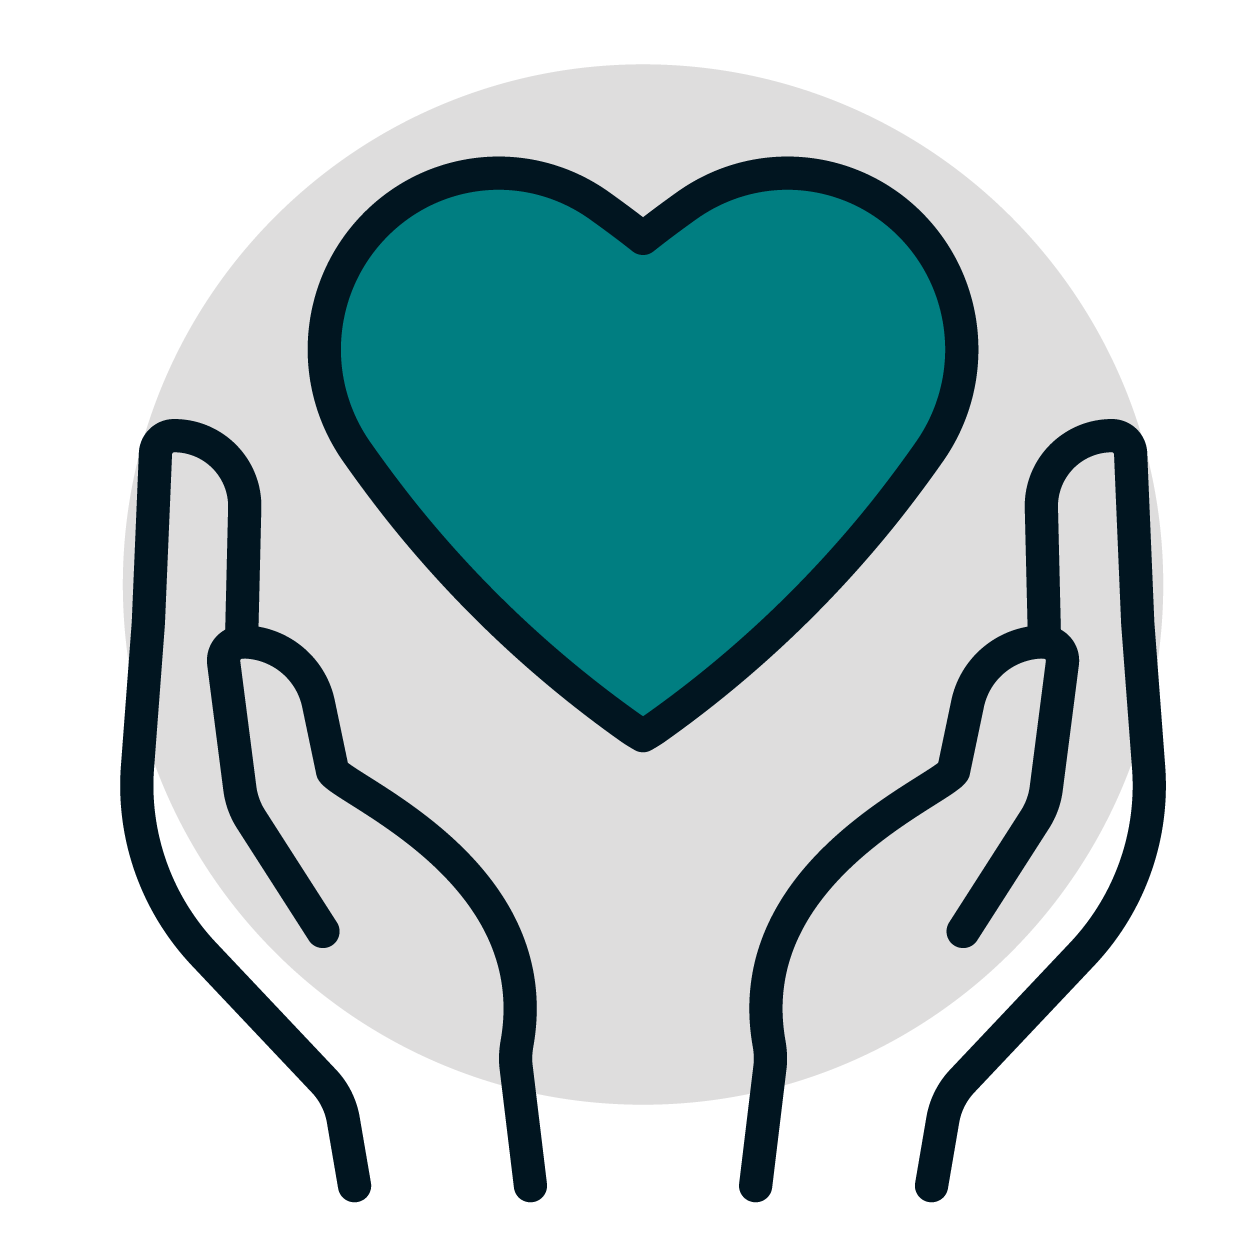 Compassion; hands holding a heart icon